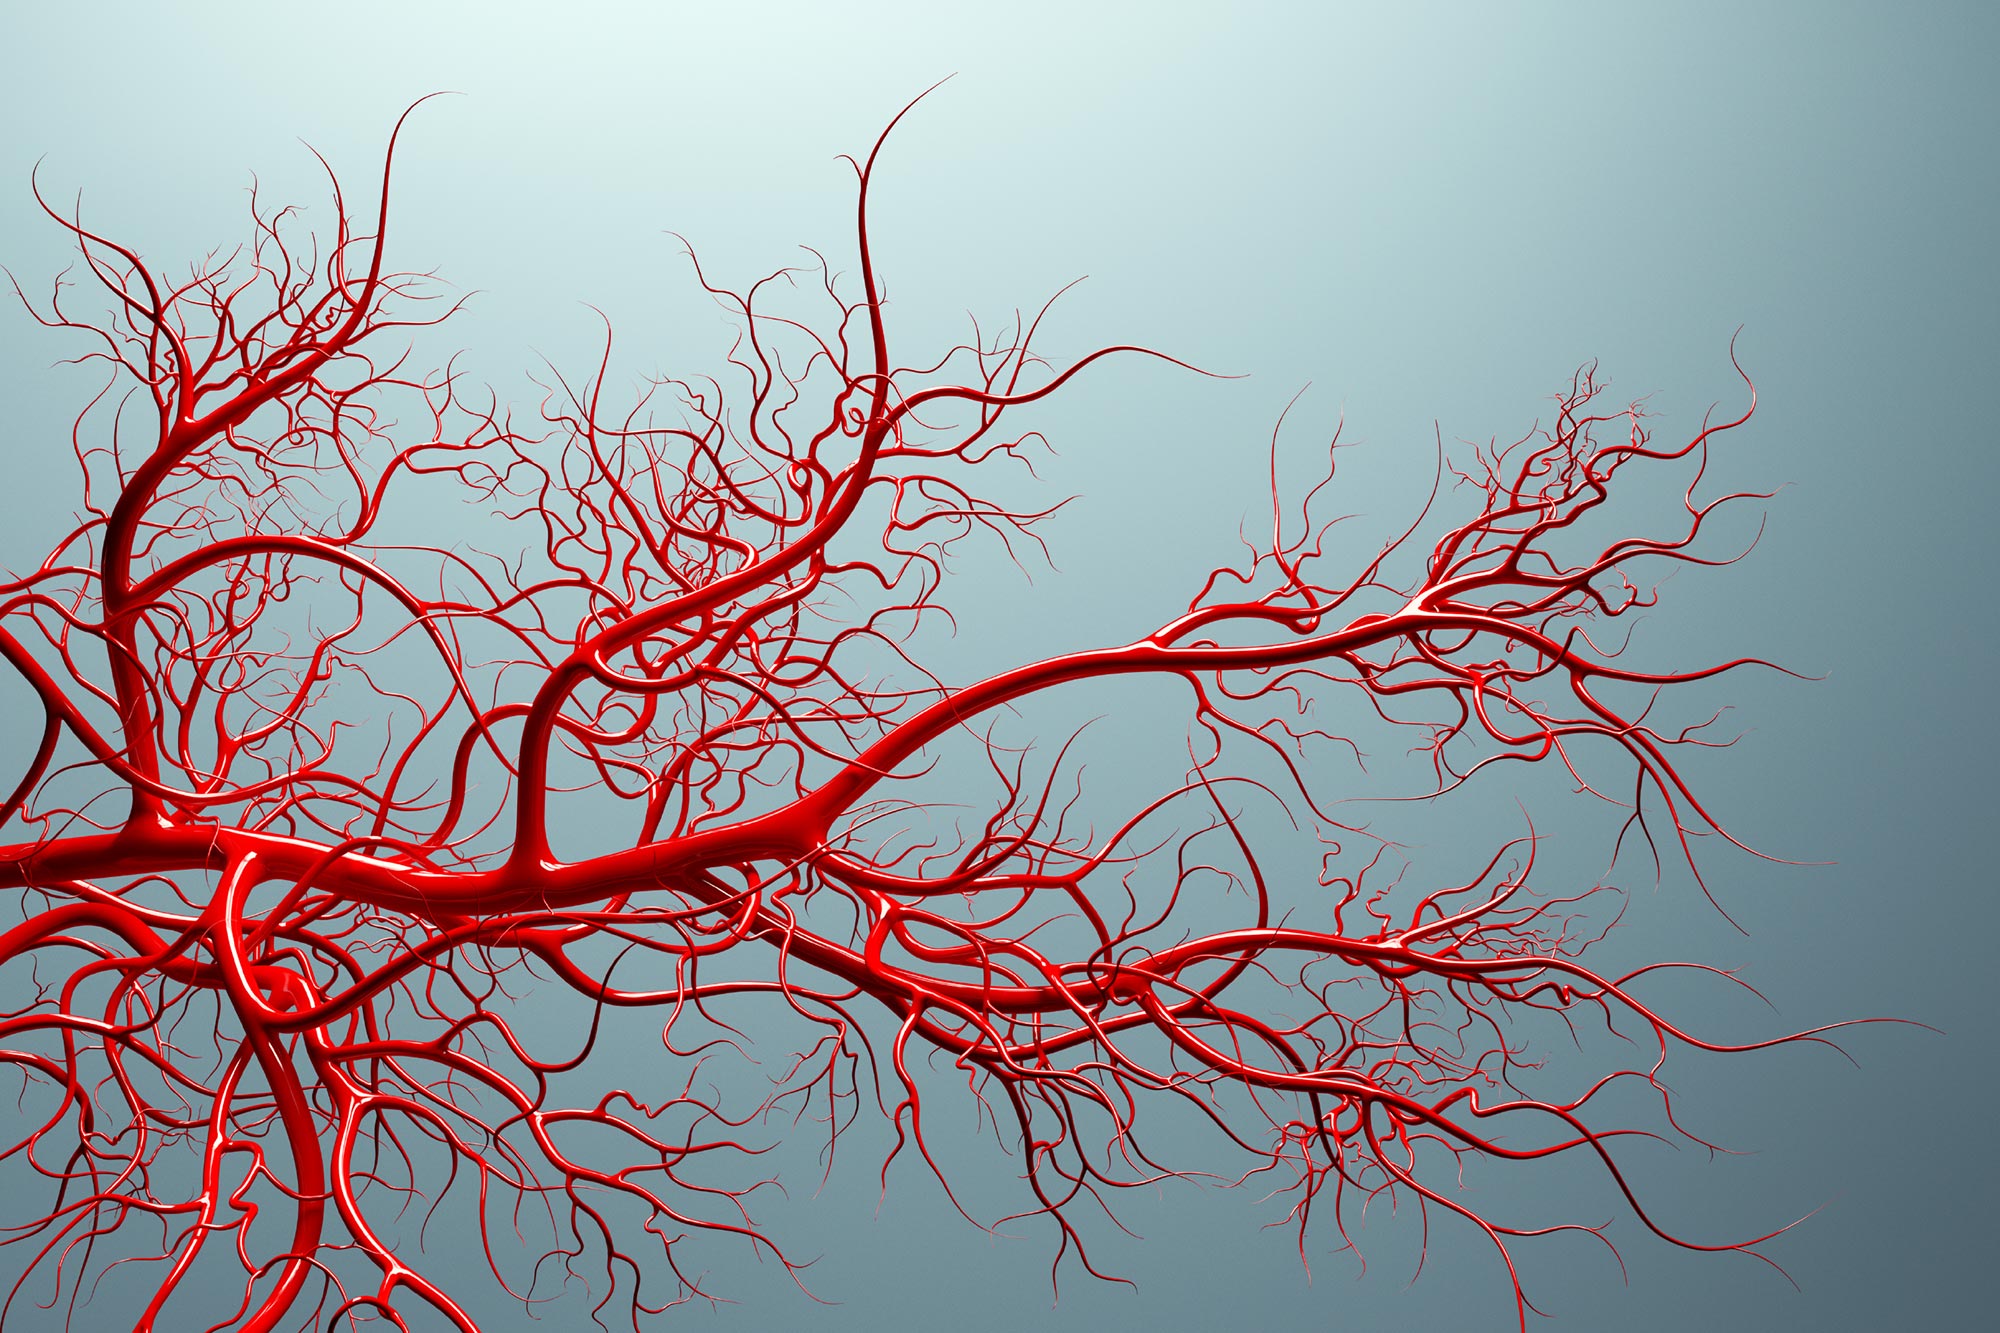 Cheaper and Safer: A New Effective Treatment for Abnormal Blood Vessel